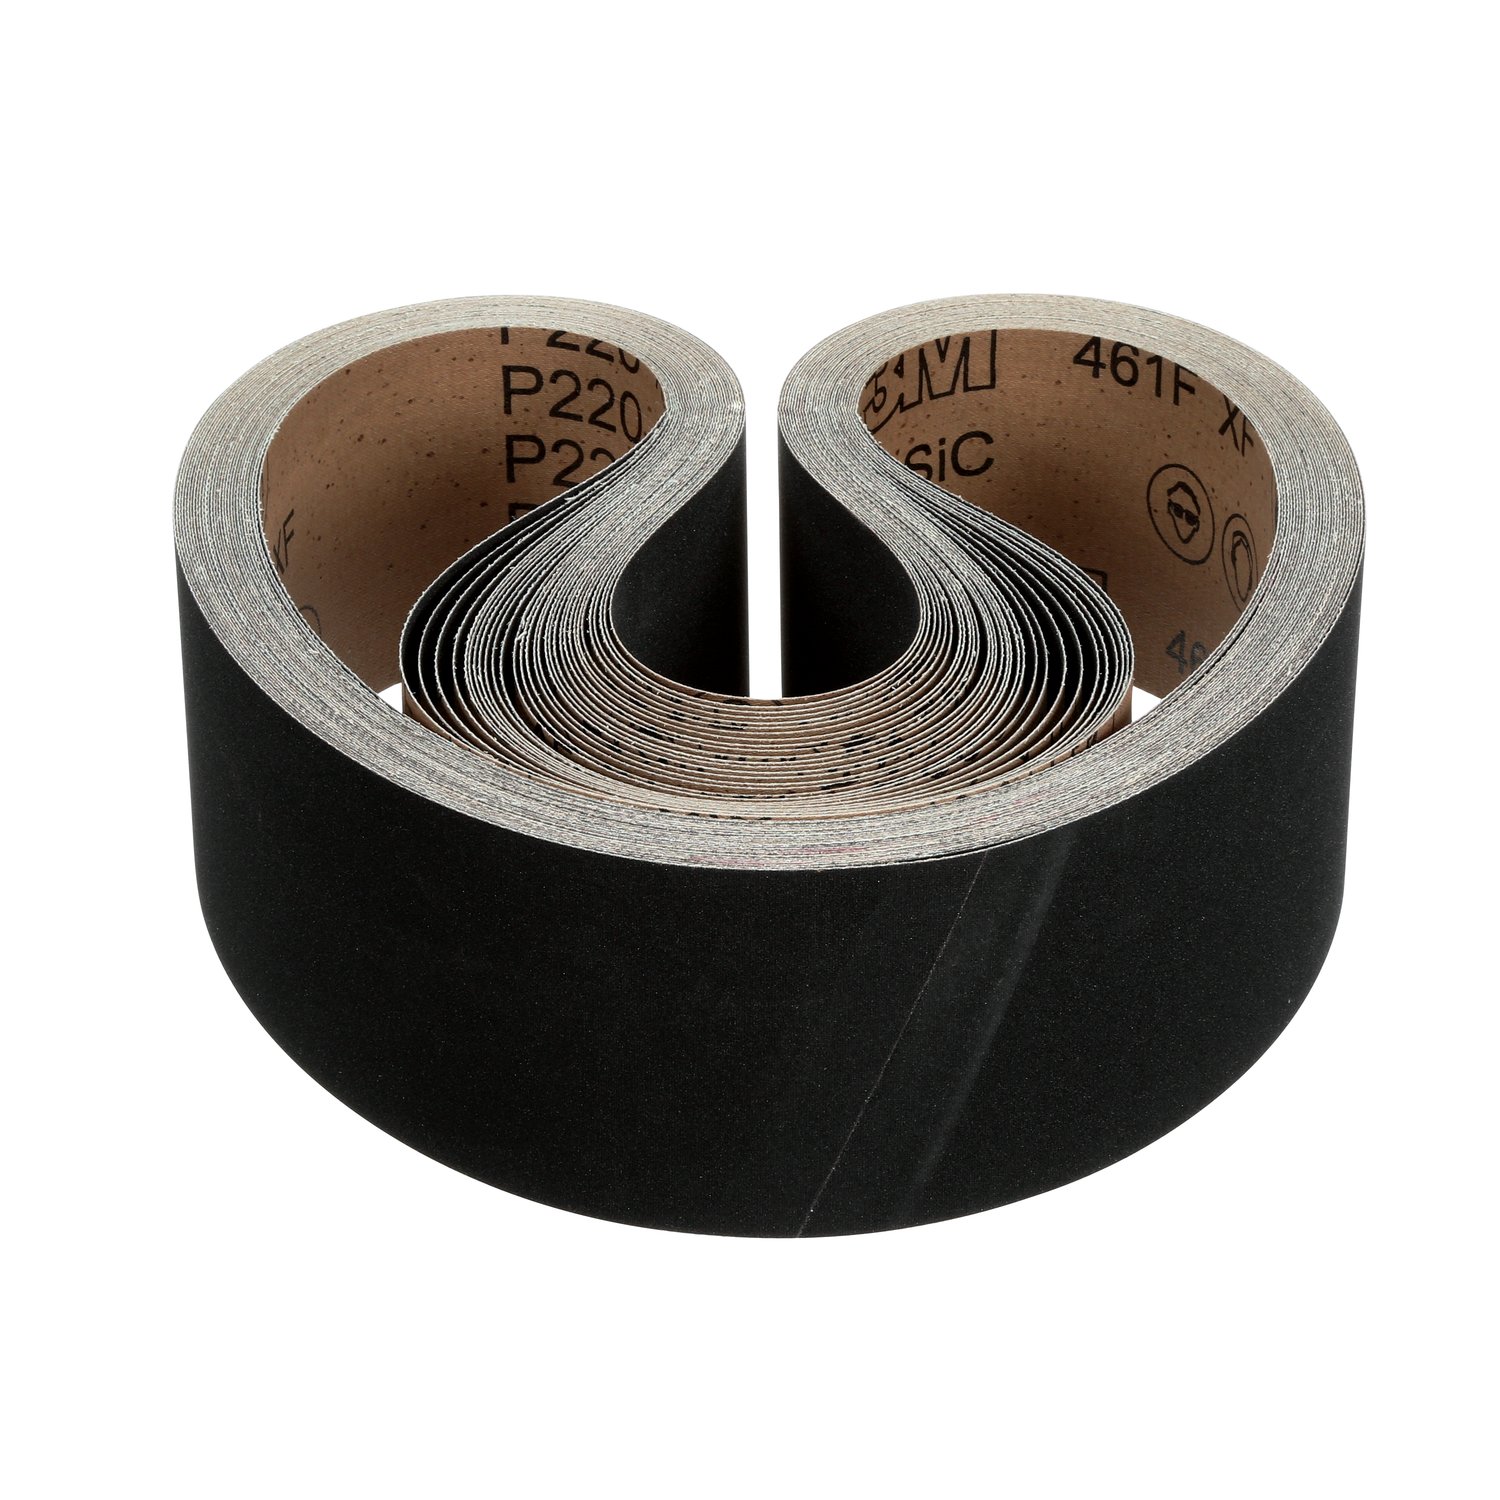 7100189019 - 3M Cloth Belt 461F, P400 XF-weight, 4 in x 156 in, Sine-lok 45° Angle,
Precision Roll Grinding, 50 ea/Case